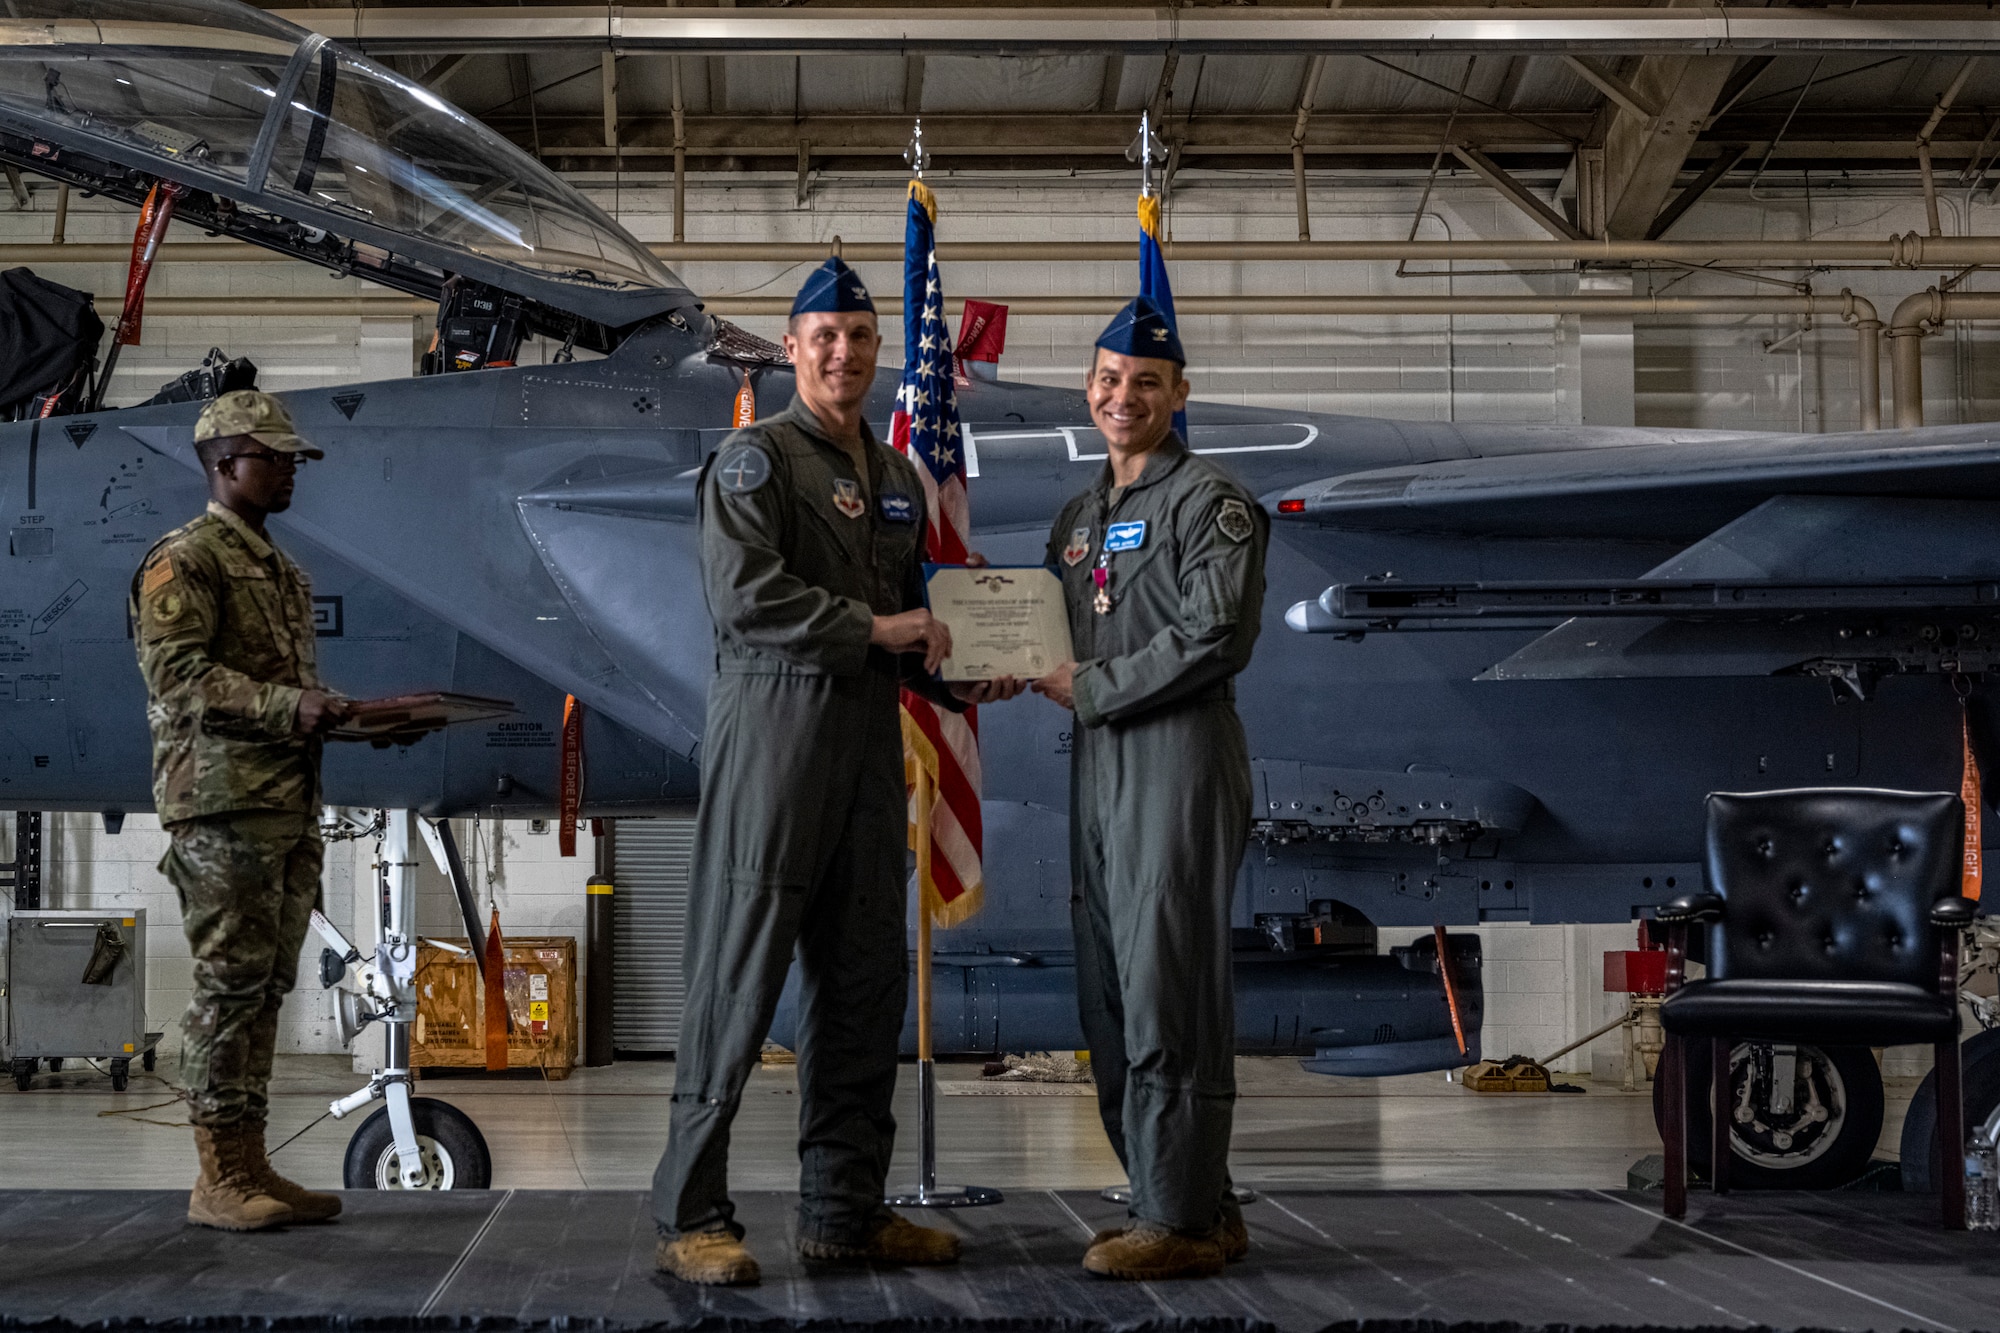 Alfaro has commanded at the squadron level, has over 2,100 flying hours in the F-15E Strike Eagle and 743 combat hours in support of Operation Iraqi Freedom and Operation Enduring Freedom. (U.S. Air Force photo by Senior Airman Kylie Barrow)